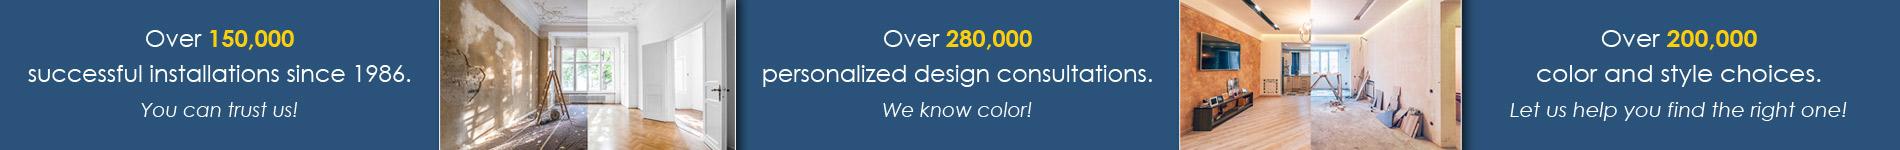 Over 200,000 color and style choices.  Let us help you find the right one!  Over 280,000 personalized design consultations.  We know color!  Over 150,000 successful installations since 1986.  You can trust us!